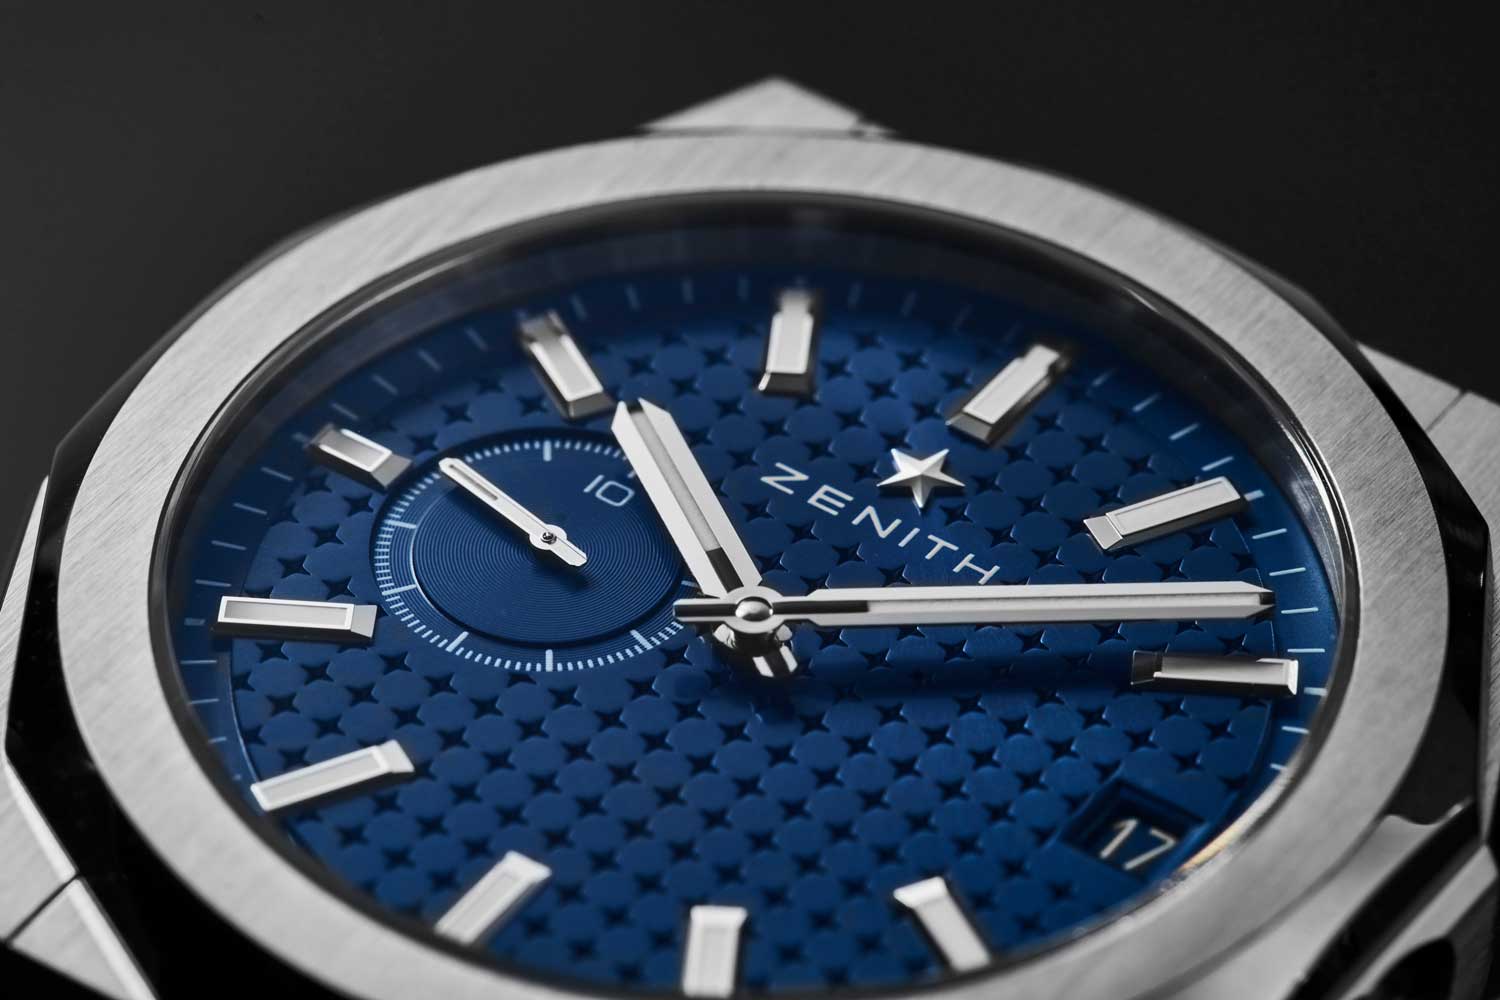 A closer look at the blue sunburst dial with star motif engraved across its surface (Image: Revolution©)